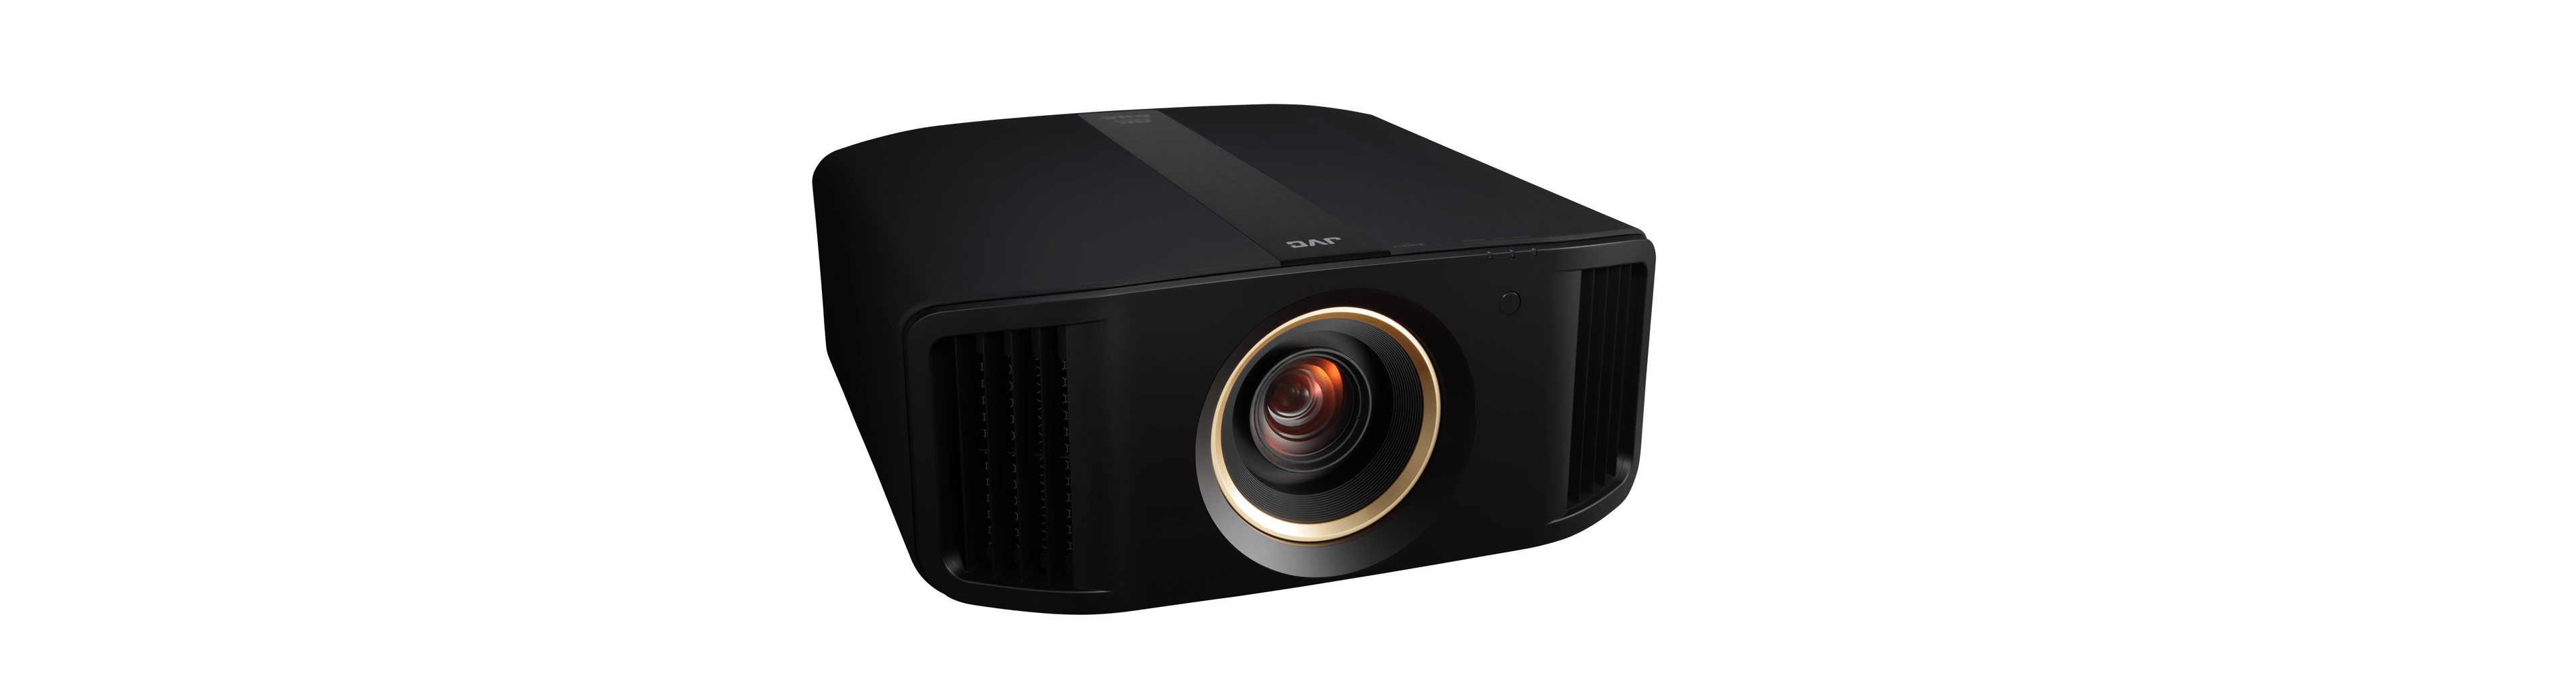 JVC DLA-RS3100 projector